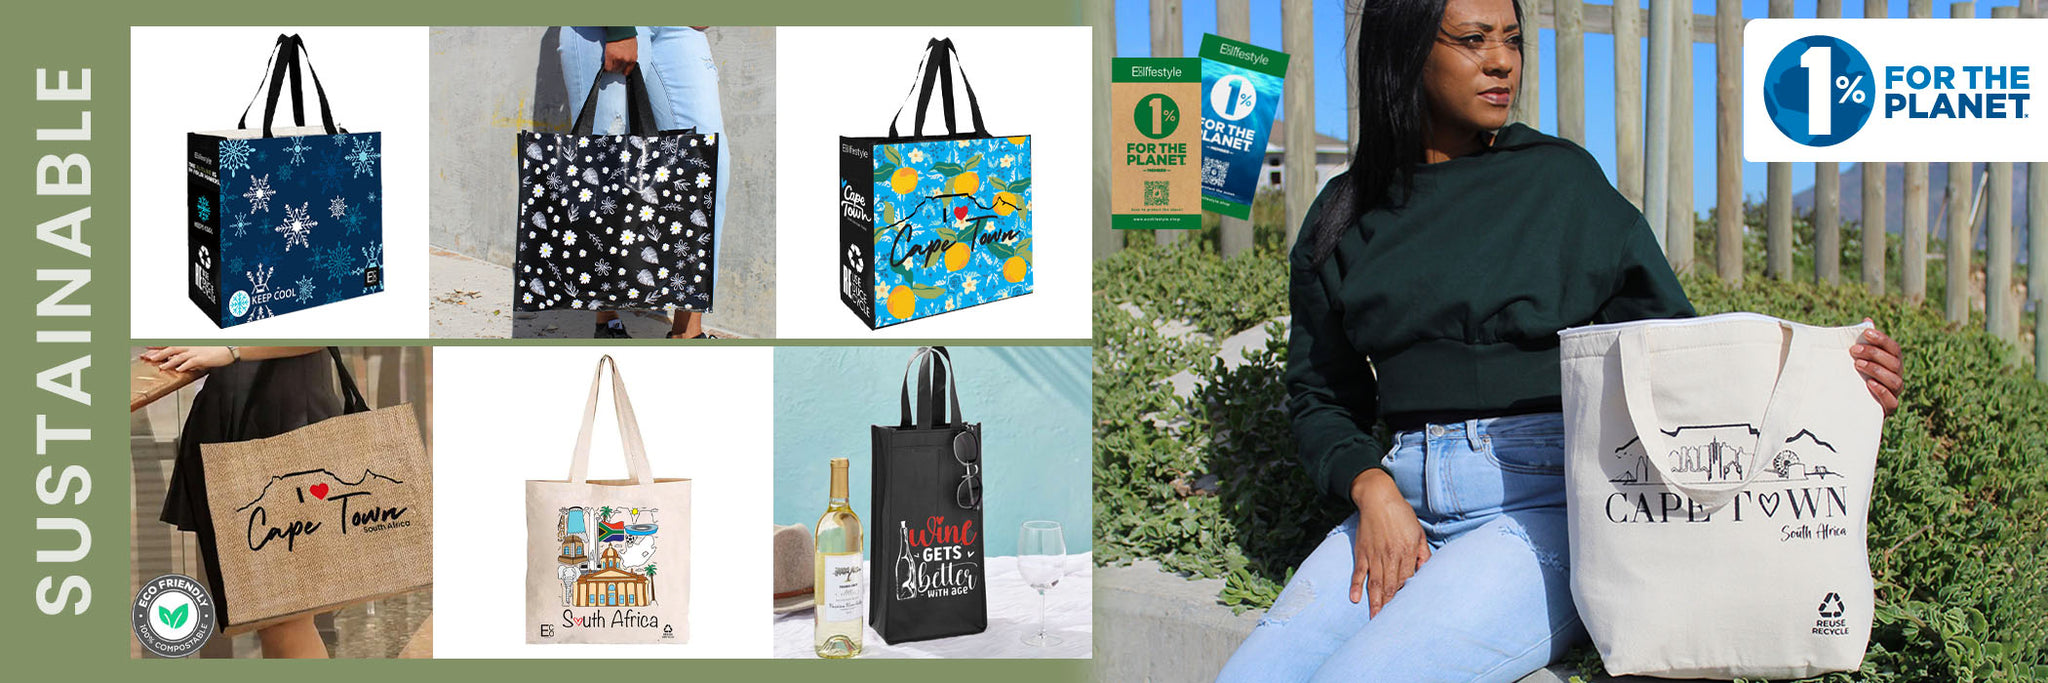 Sustainable shopper bags